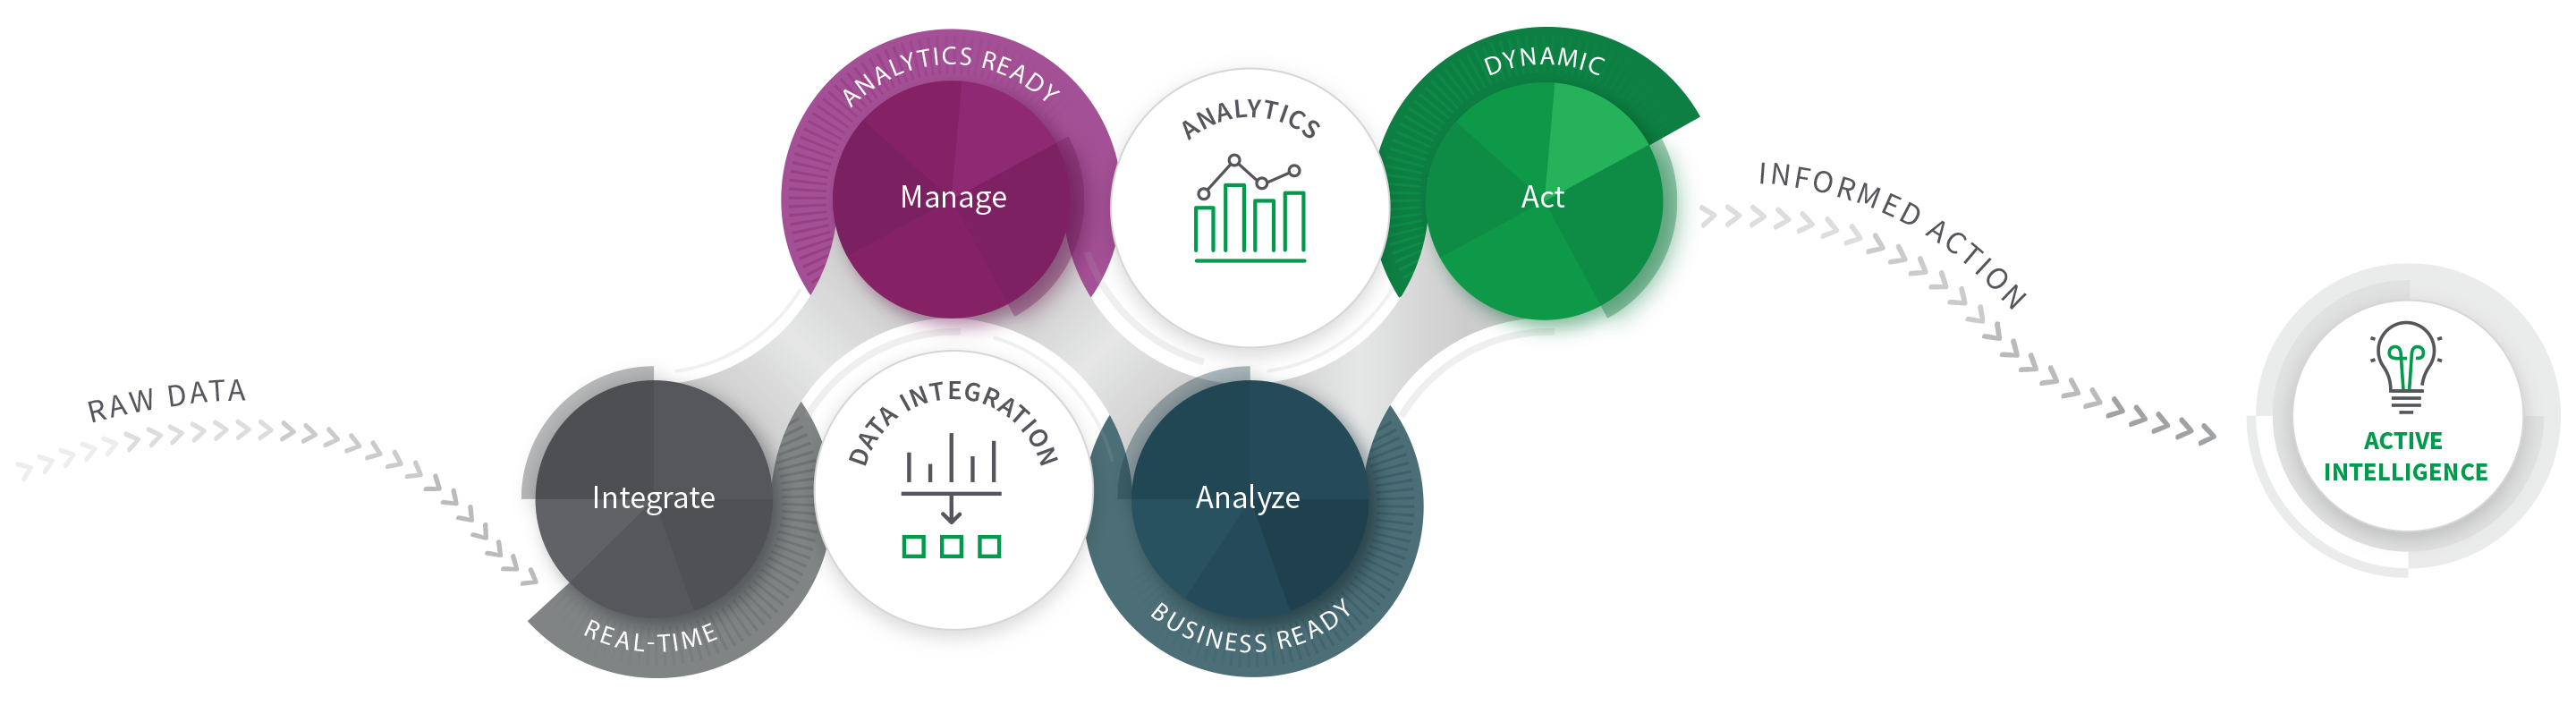 Infographic illustrating how the Qlik suite of products and services work together to transform raw data into insights and drive orchestrated actions.